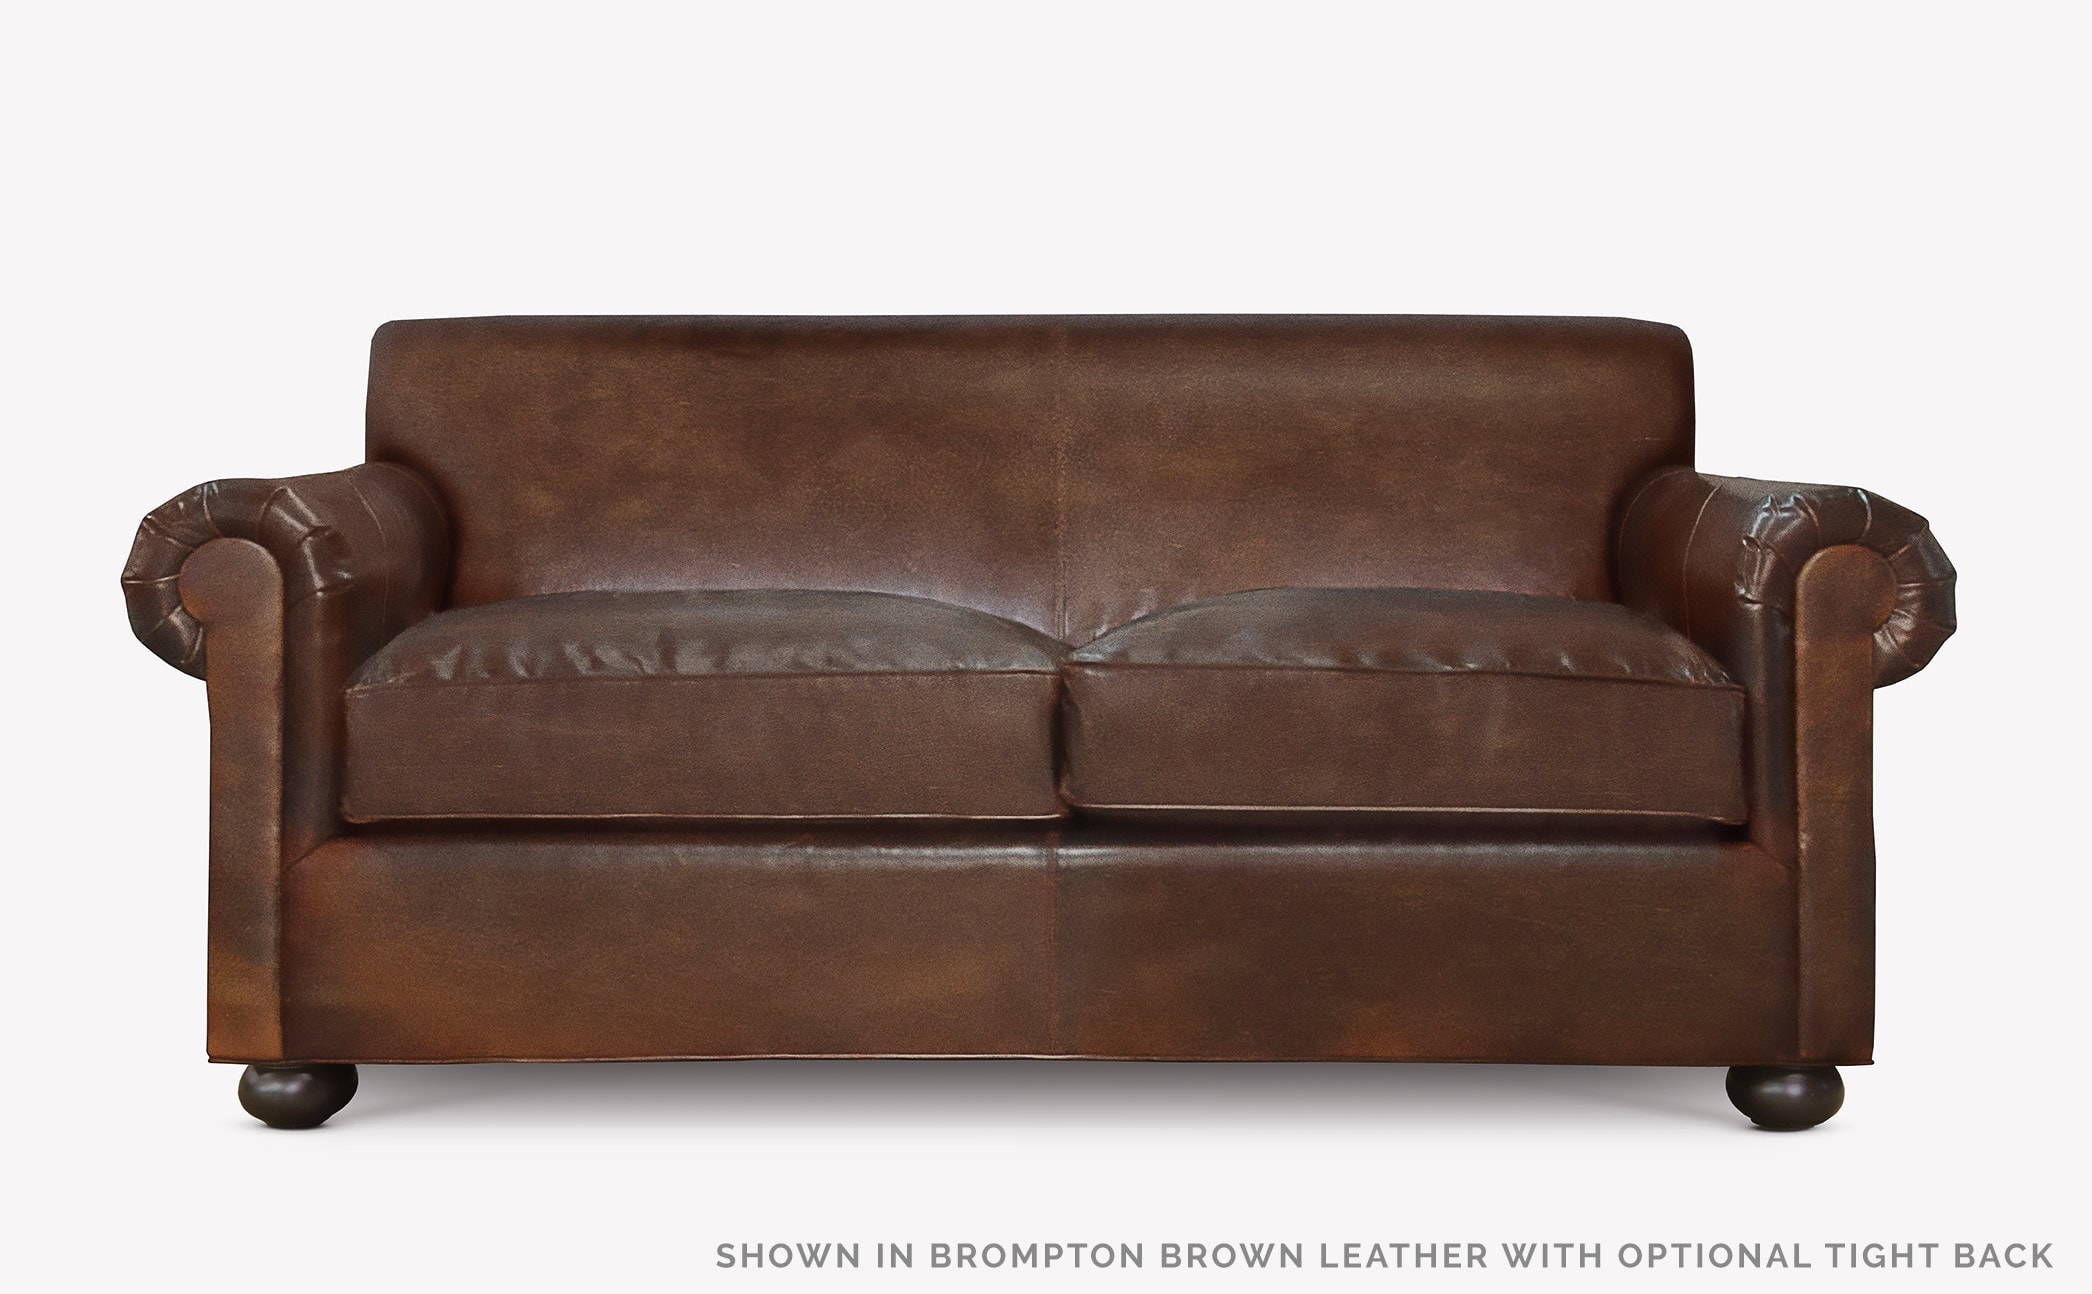 Franklin Tight Back Roll Arm Sofa in Brompton Brown Leather